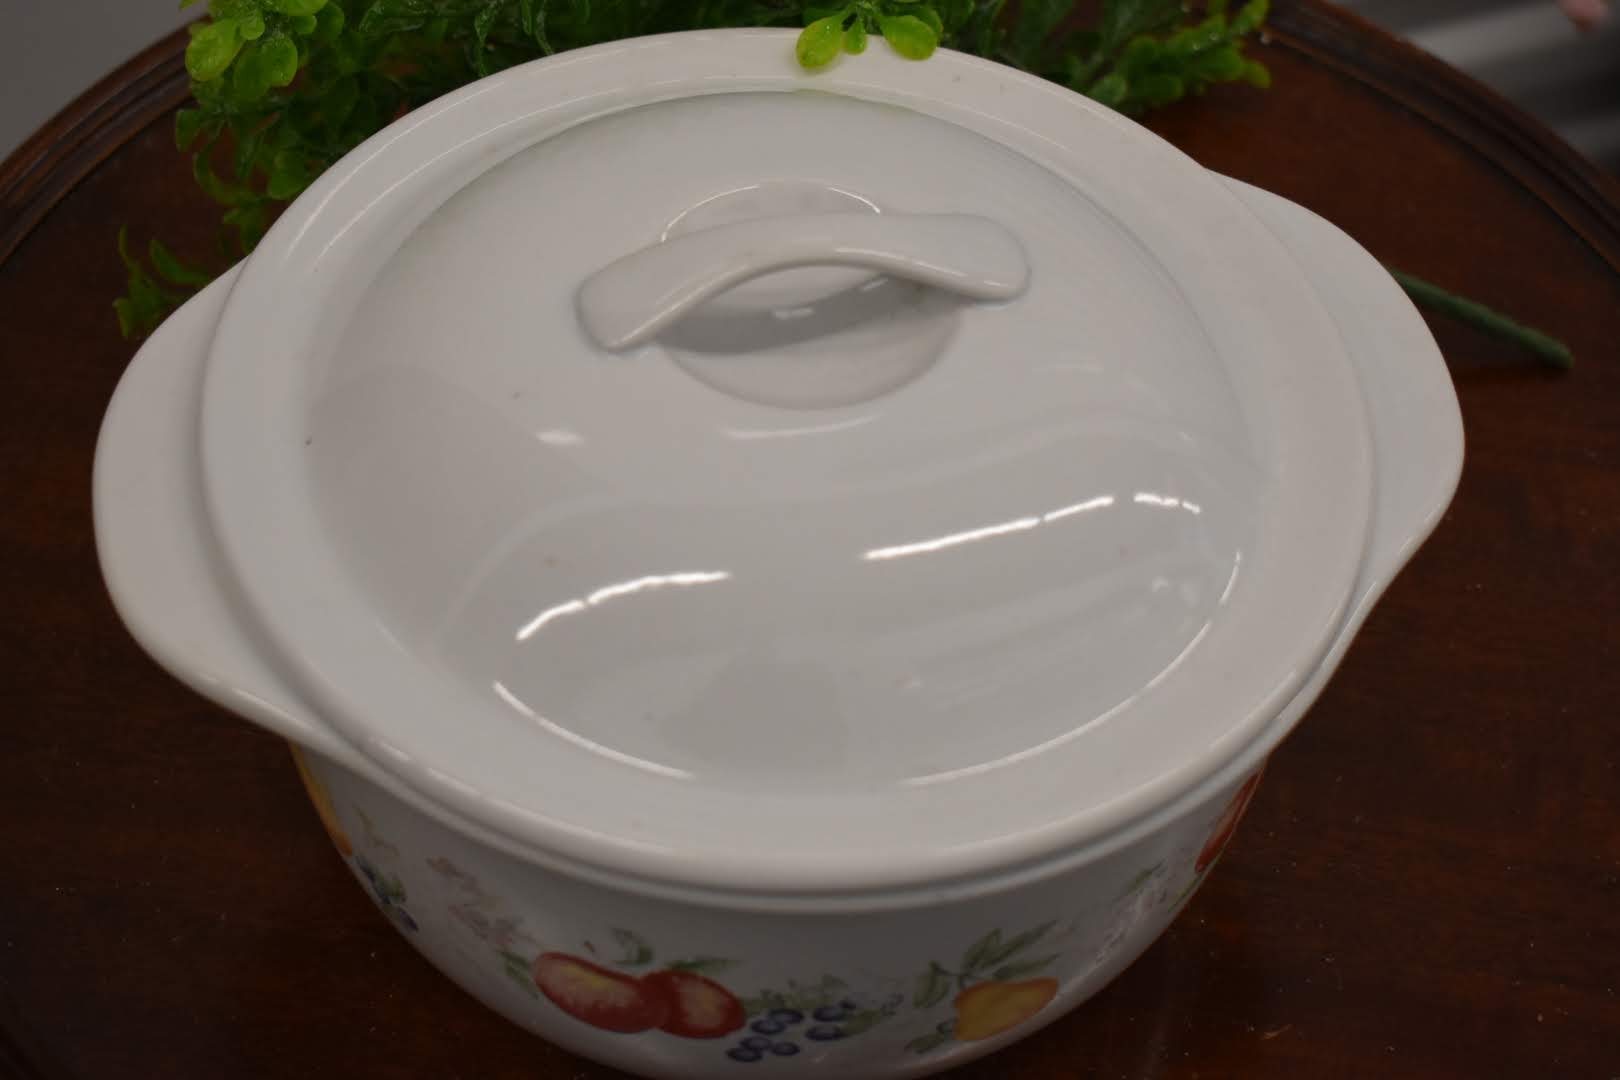 Vintage Bright White Yellow Brown Color - Casserole Dish With Lid - Peaches and Berries Pattern